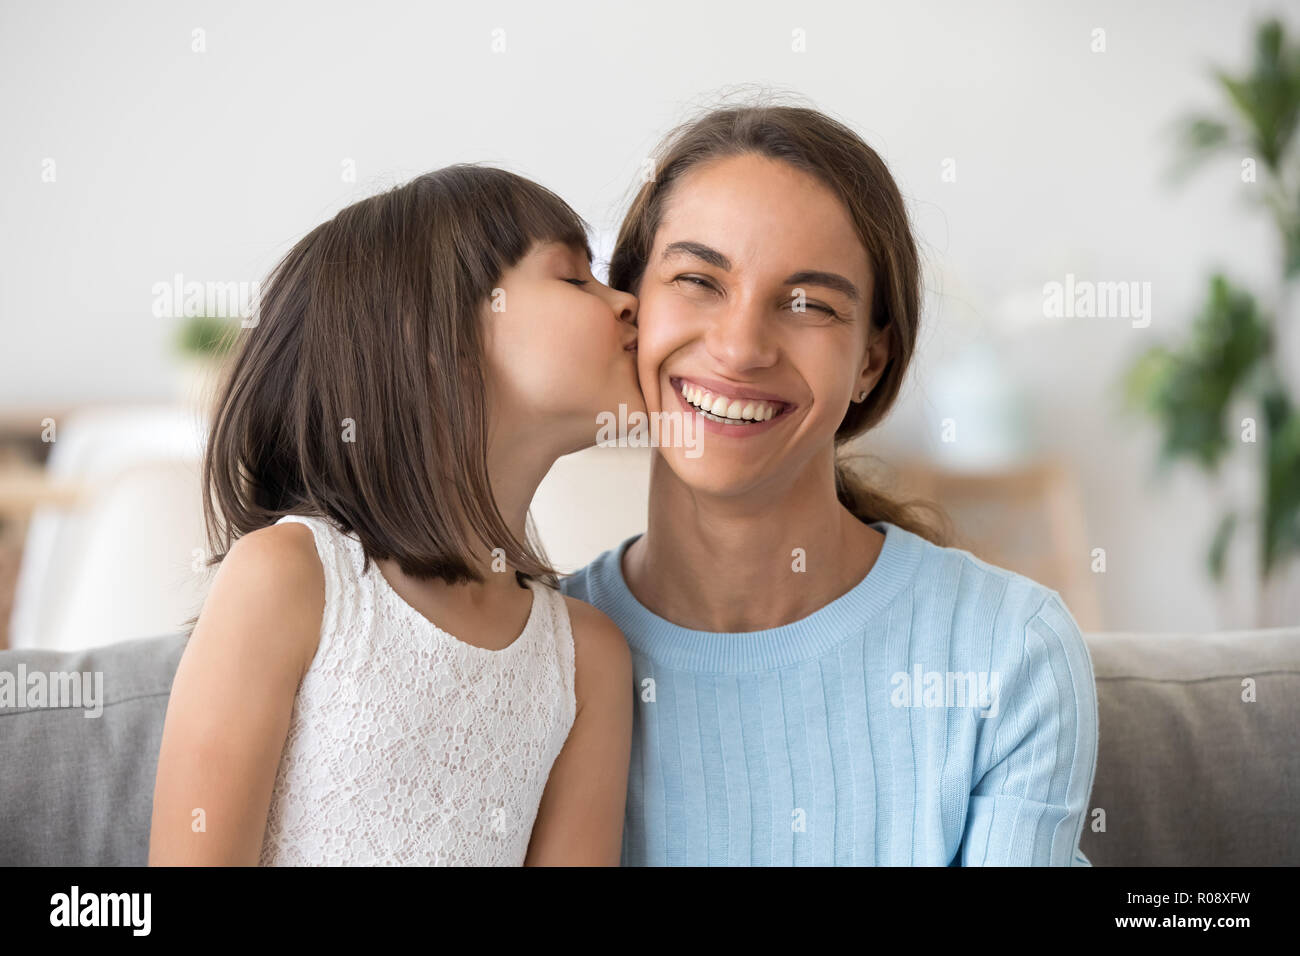 Daughter kissing mother on cheek have fun together at home Stock Photo